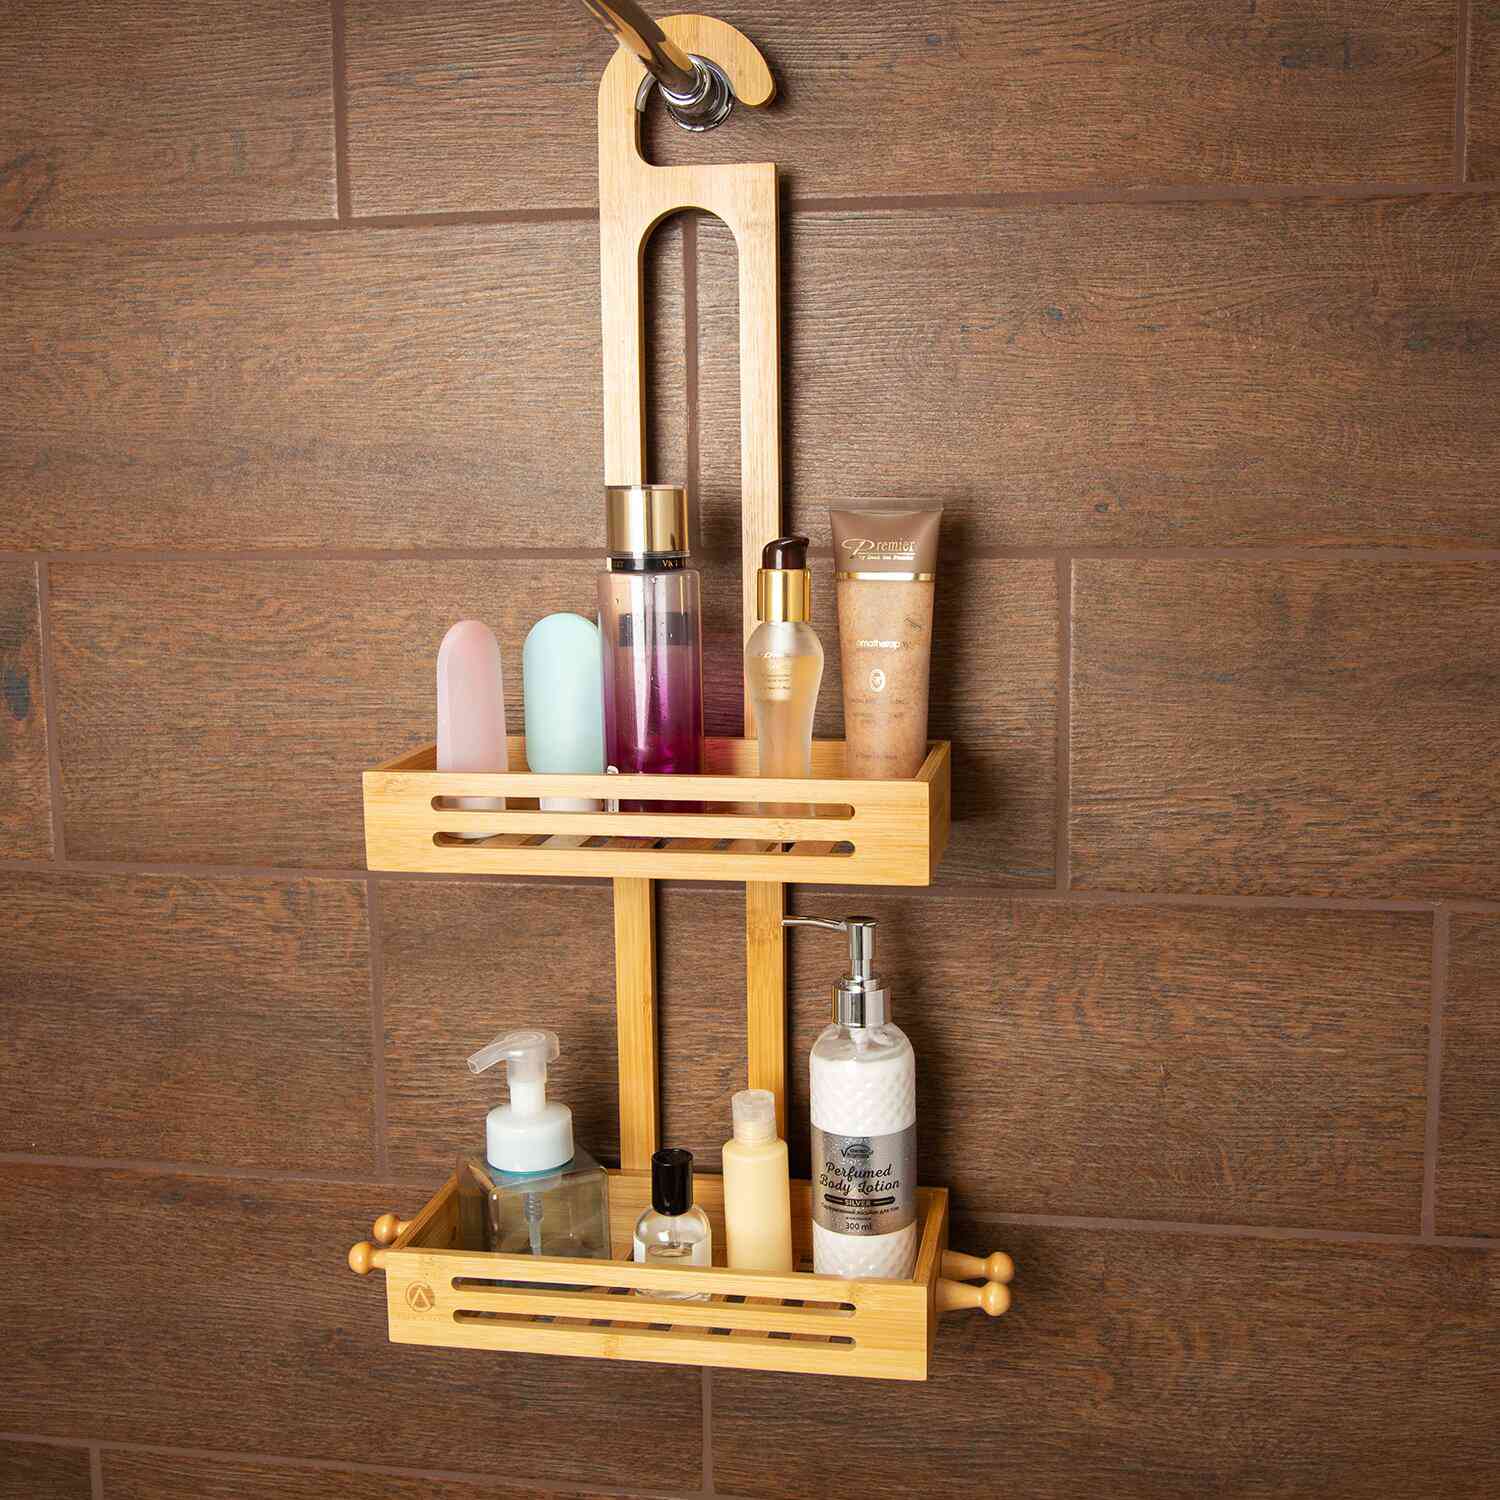 Crew & Axel Hanging Bamboo Shower Caddy